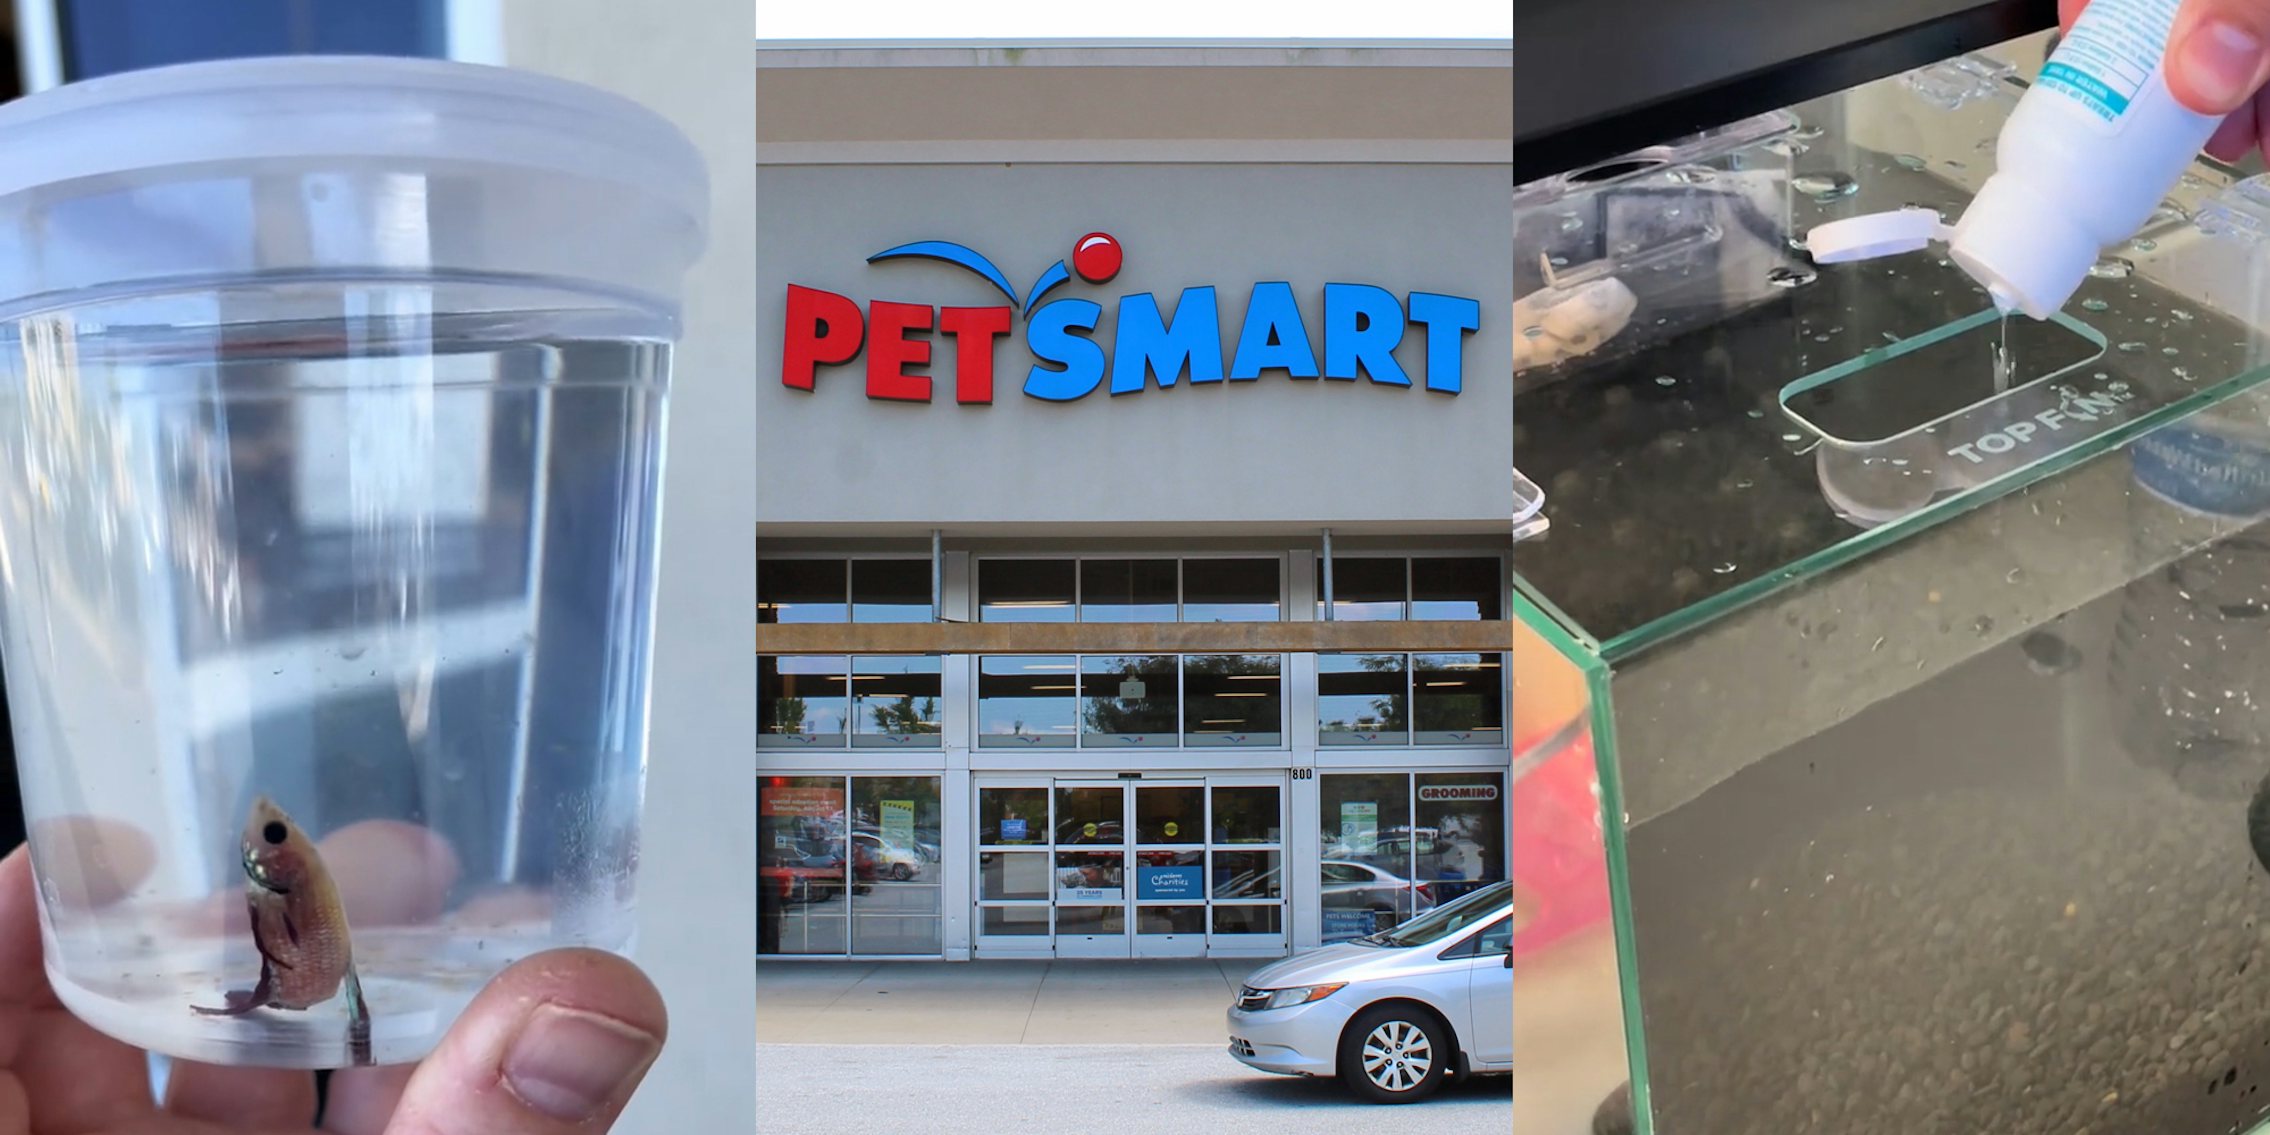 PetSmart customer holding Beta Fish in cup (l) PetSmart building with sign (c) PetSmart customers preparing tank for fish (r)